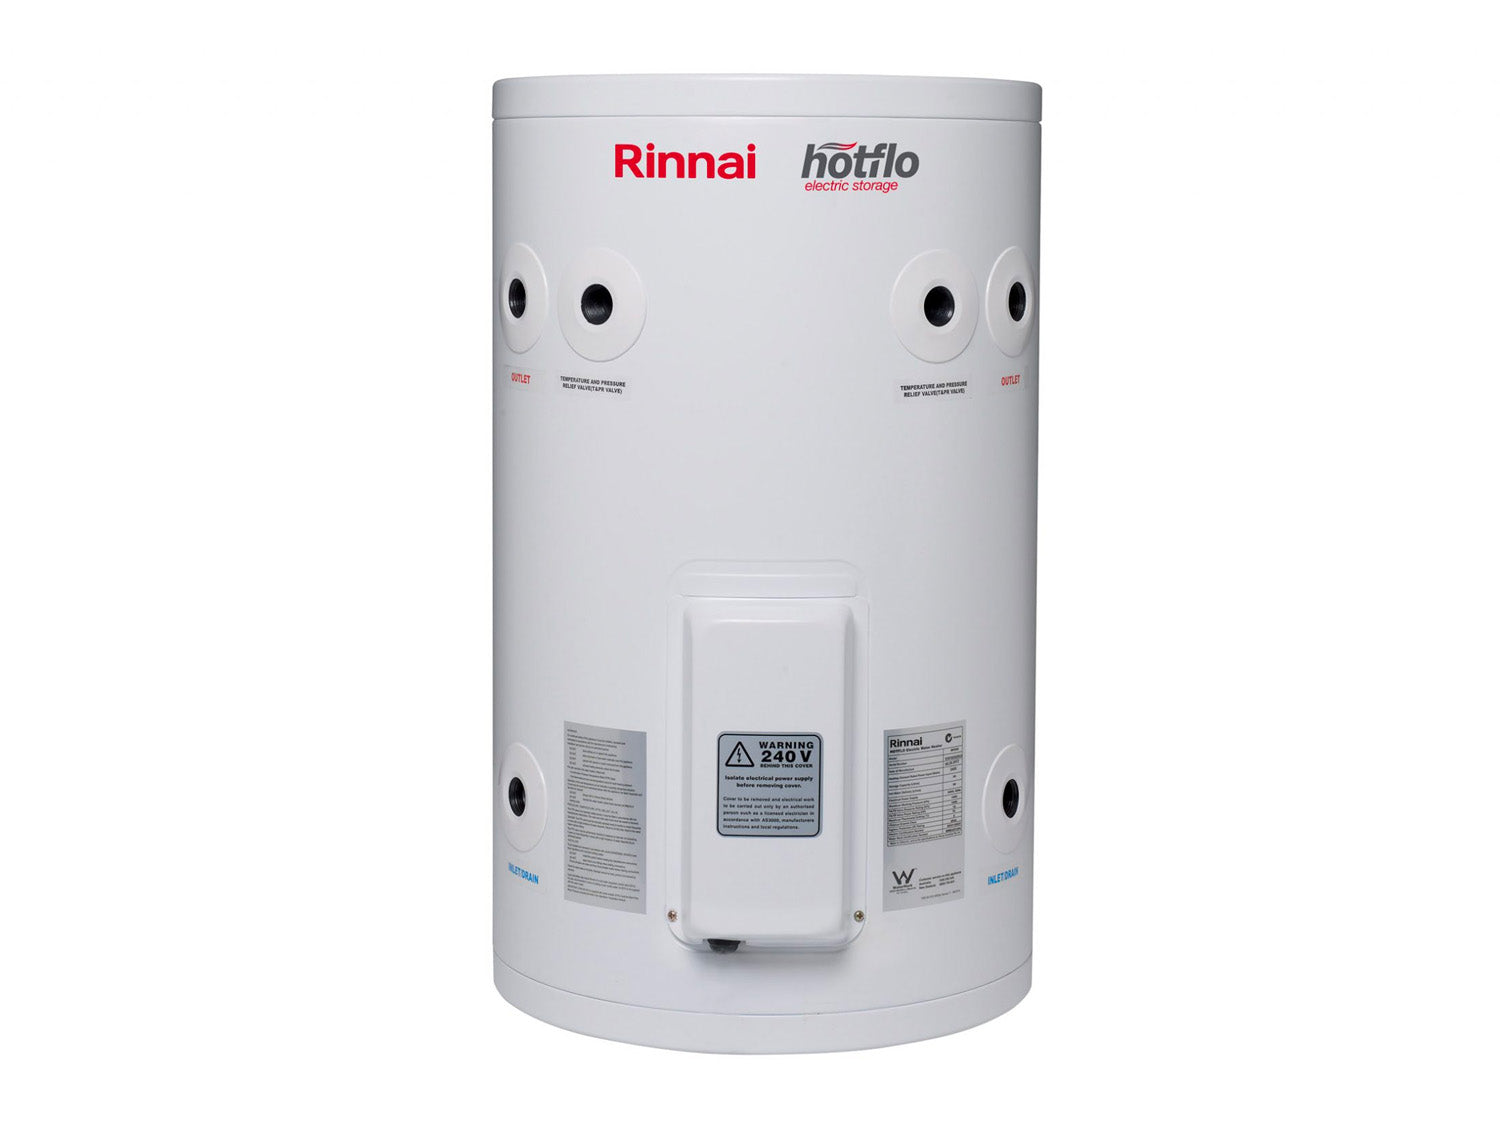 Rinnai EHFP50S36 Hotflo Plus 50L 3.6kW Electric Hot Water Storage Including Metro Perth Installation - Pacer Plumbing & Gas